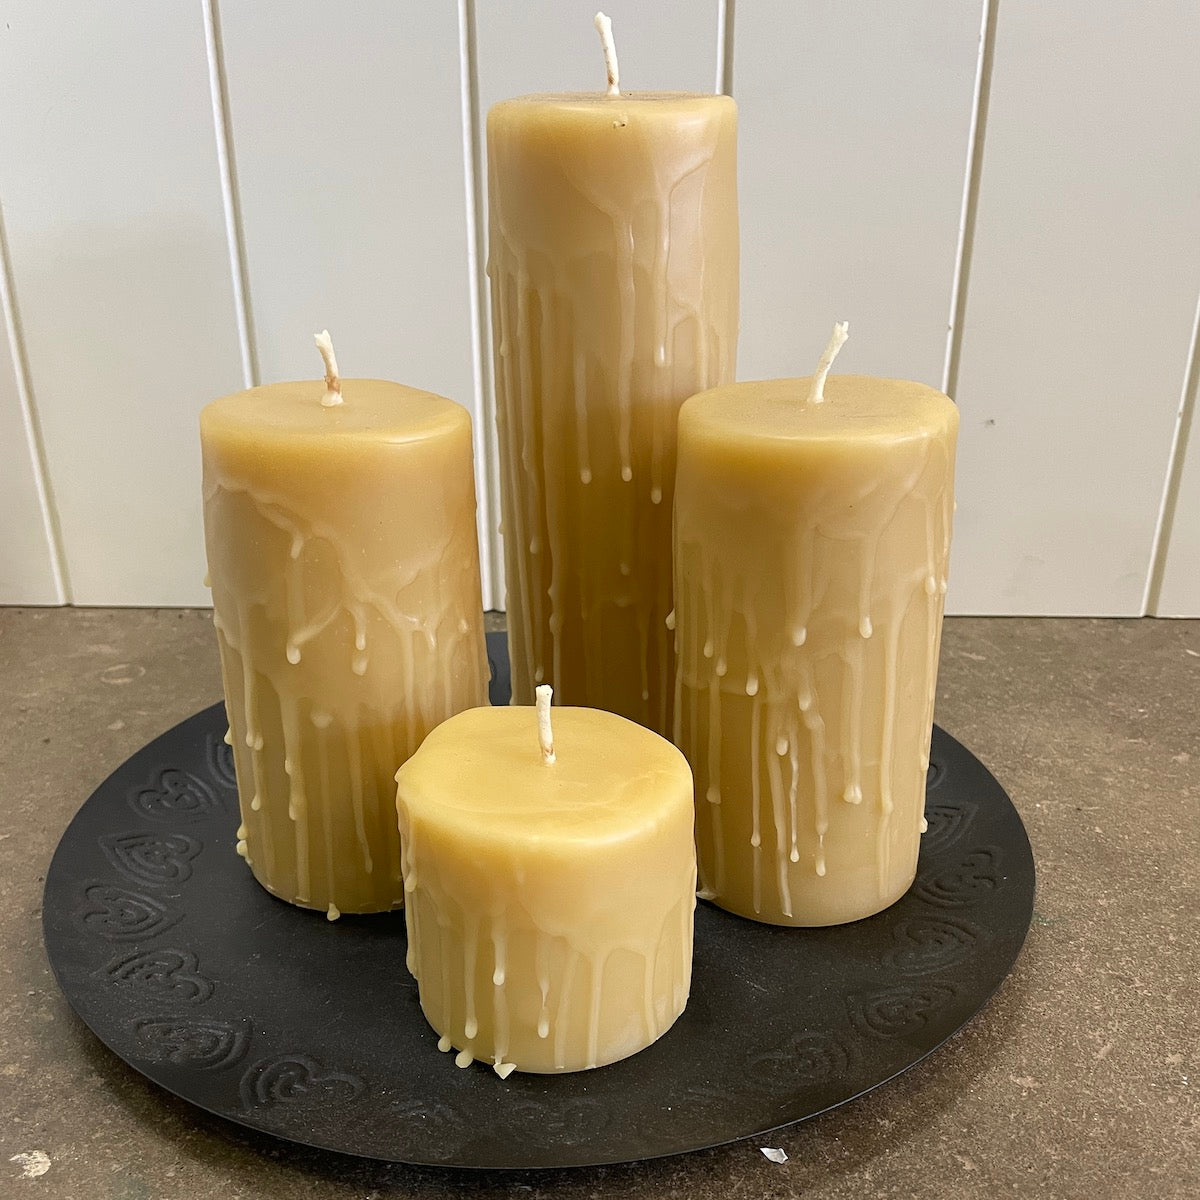 Medieval Pre-dripped candles